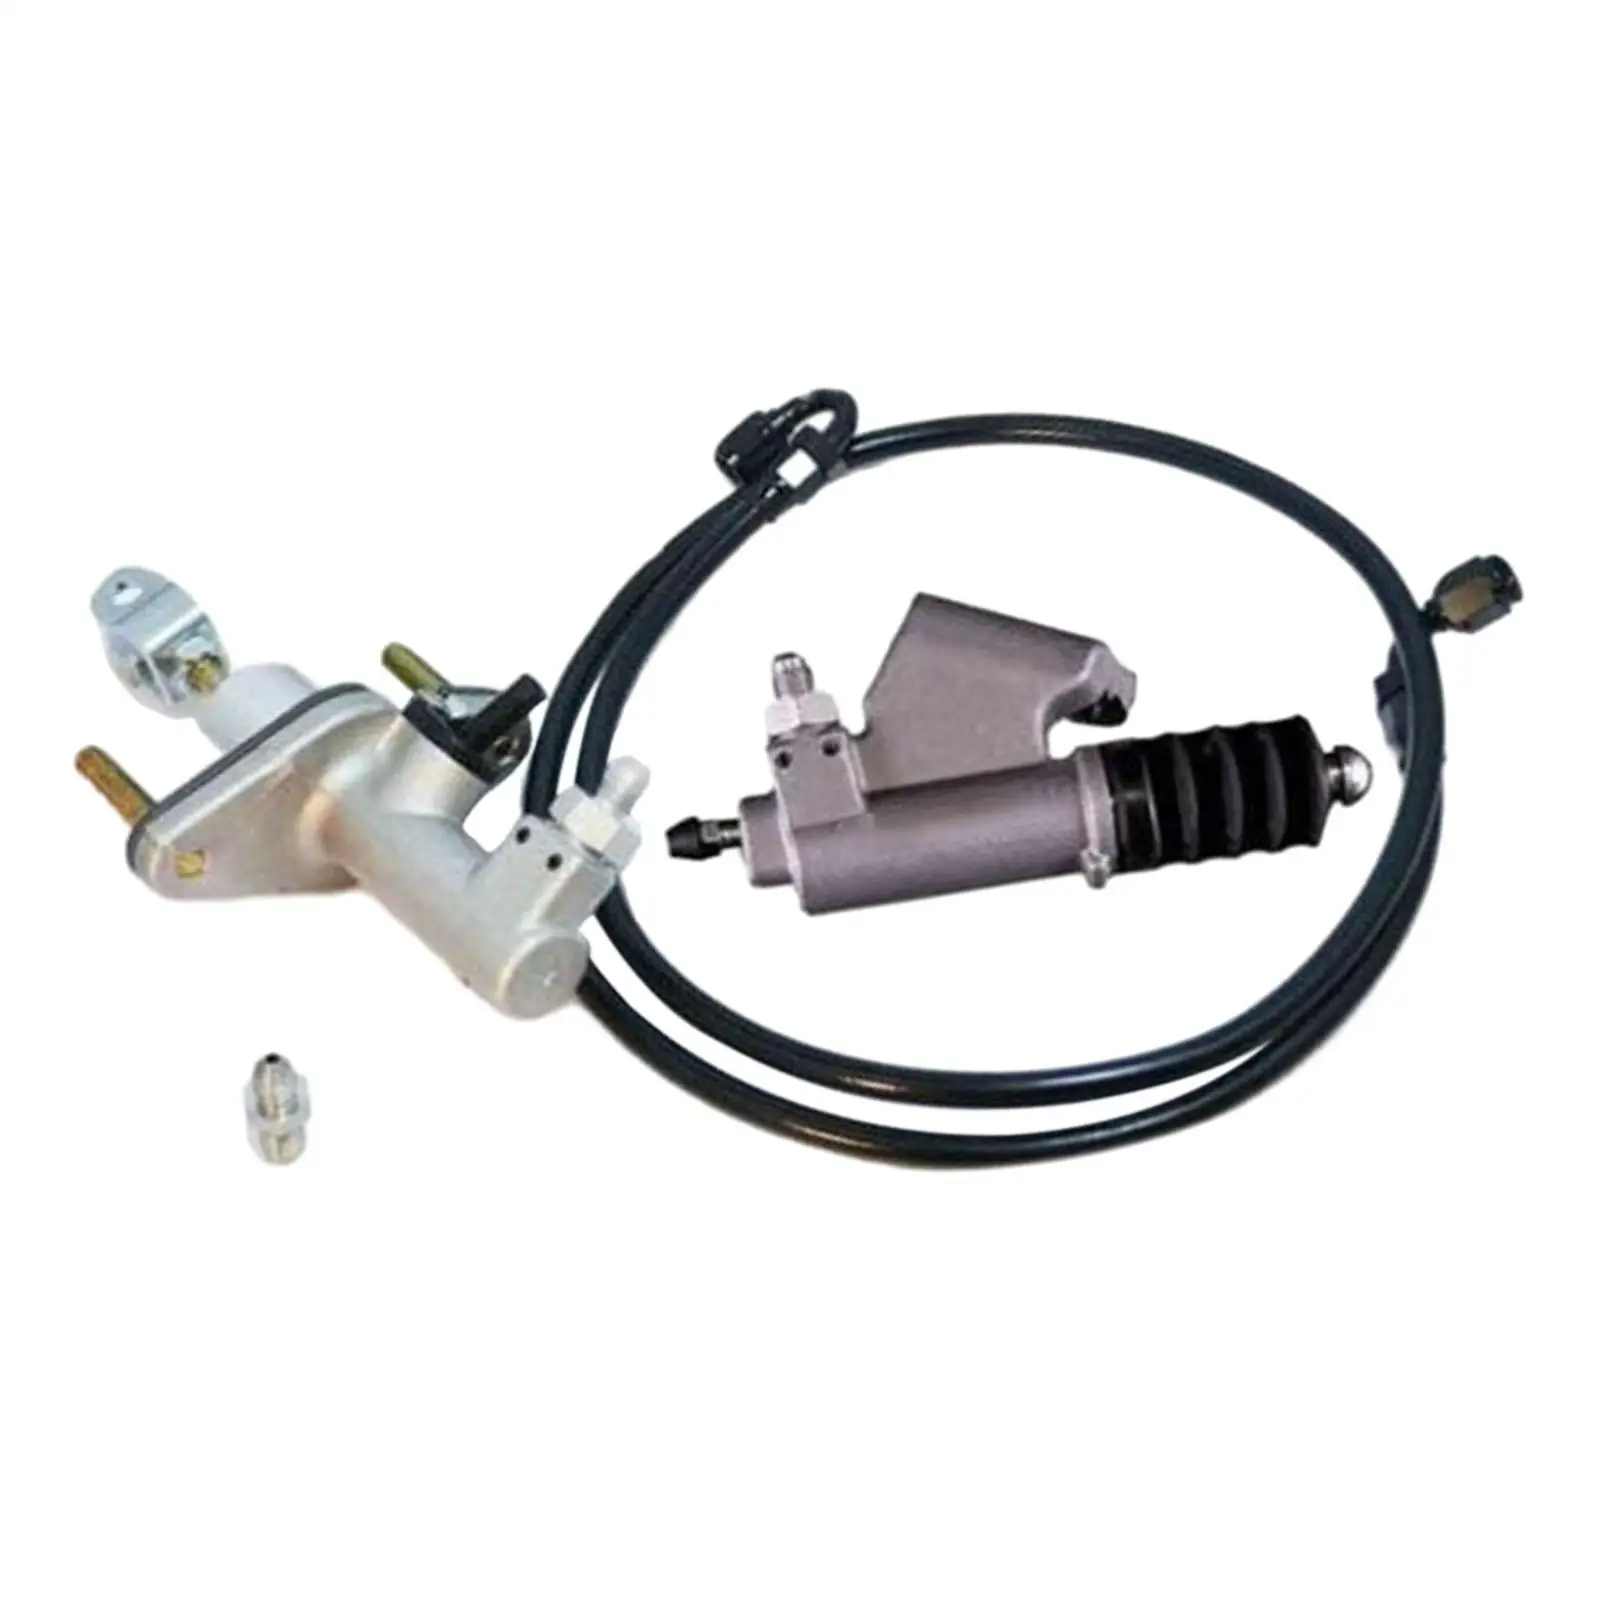 Ktd-clk-kms Clutch Master Slave Cylinder Assembly for Acura Easily Install Assembly Direct Replacement Vehicle Spare Parts